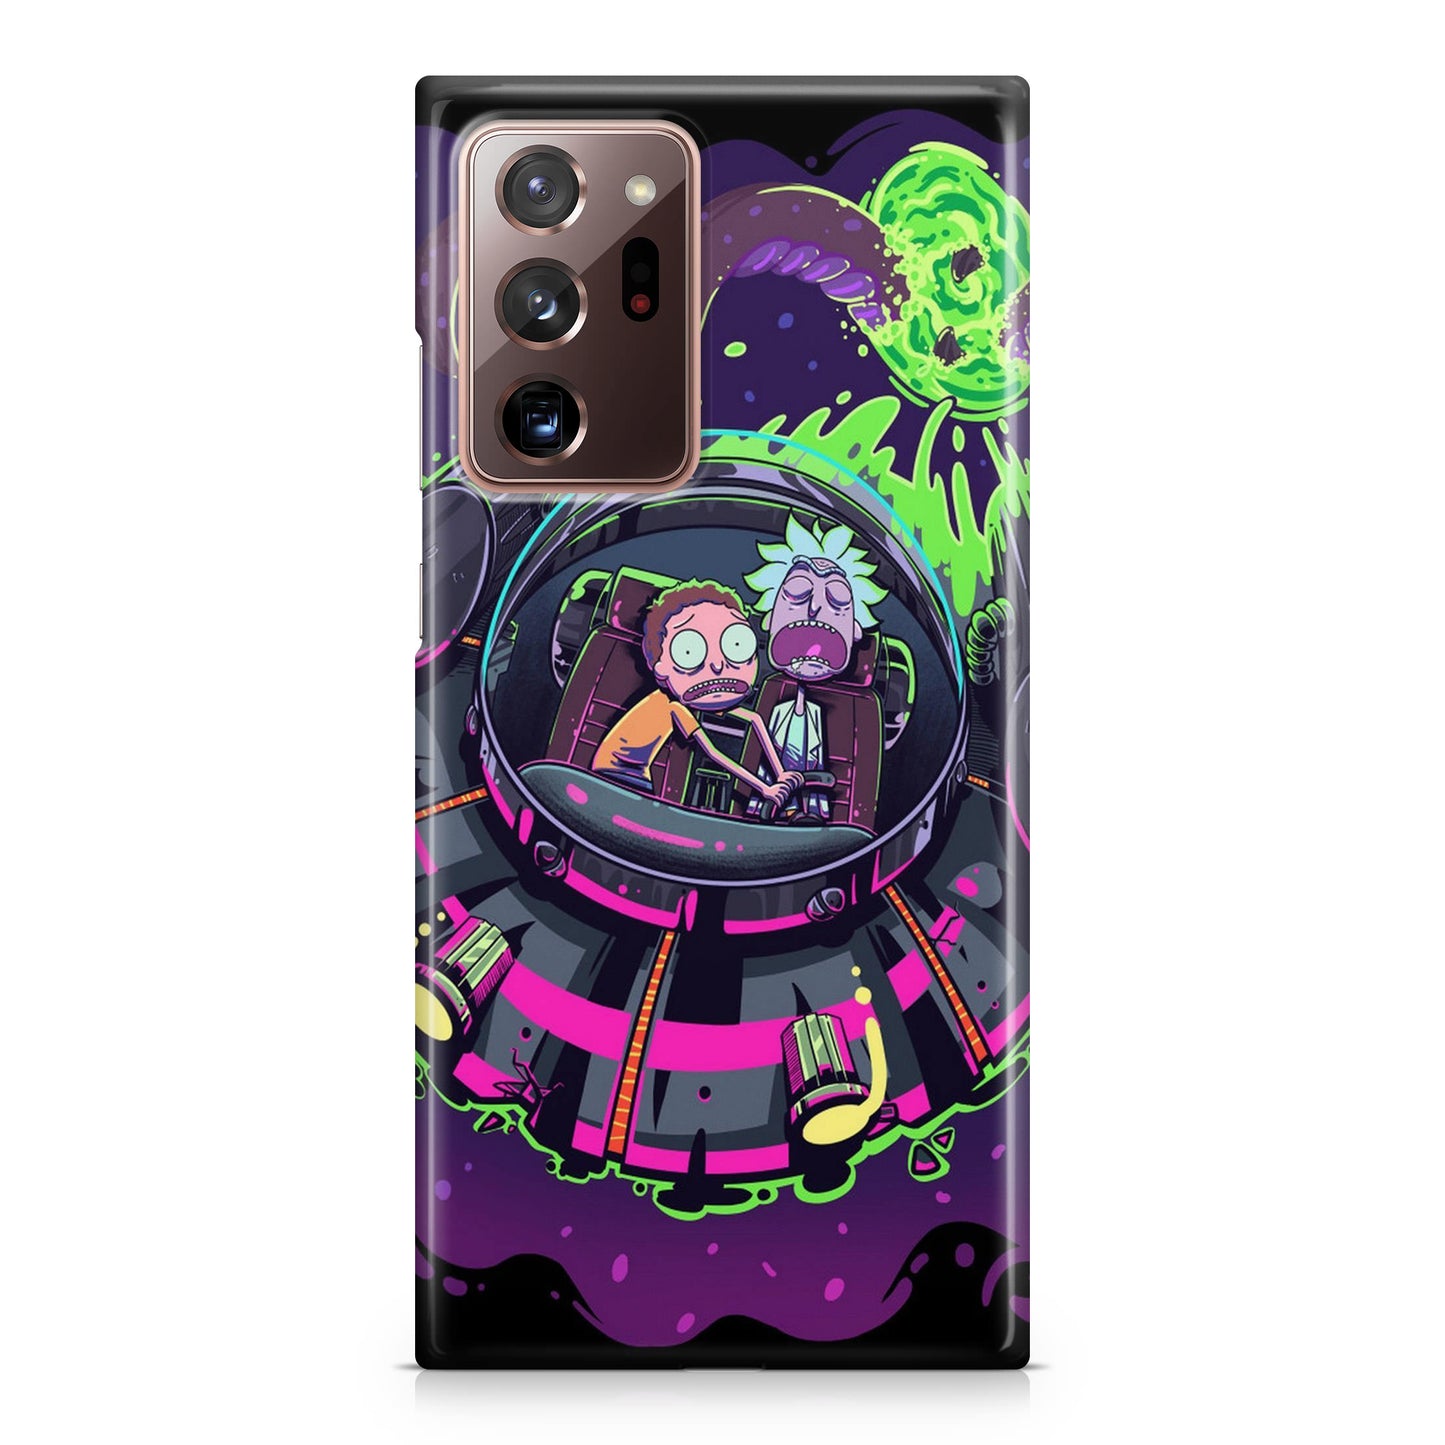 Rick And Morty Spaceship Galaxy Note 20 Ultra Case